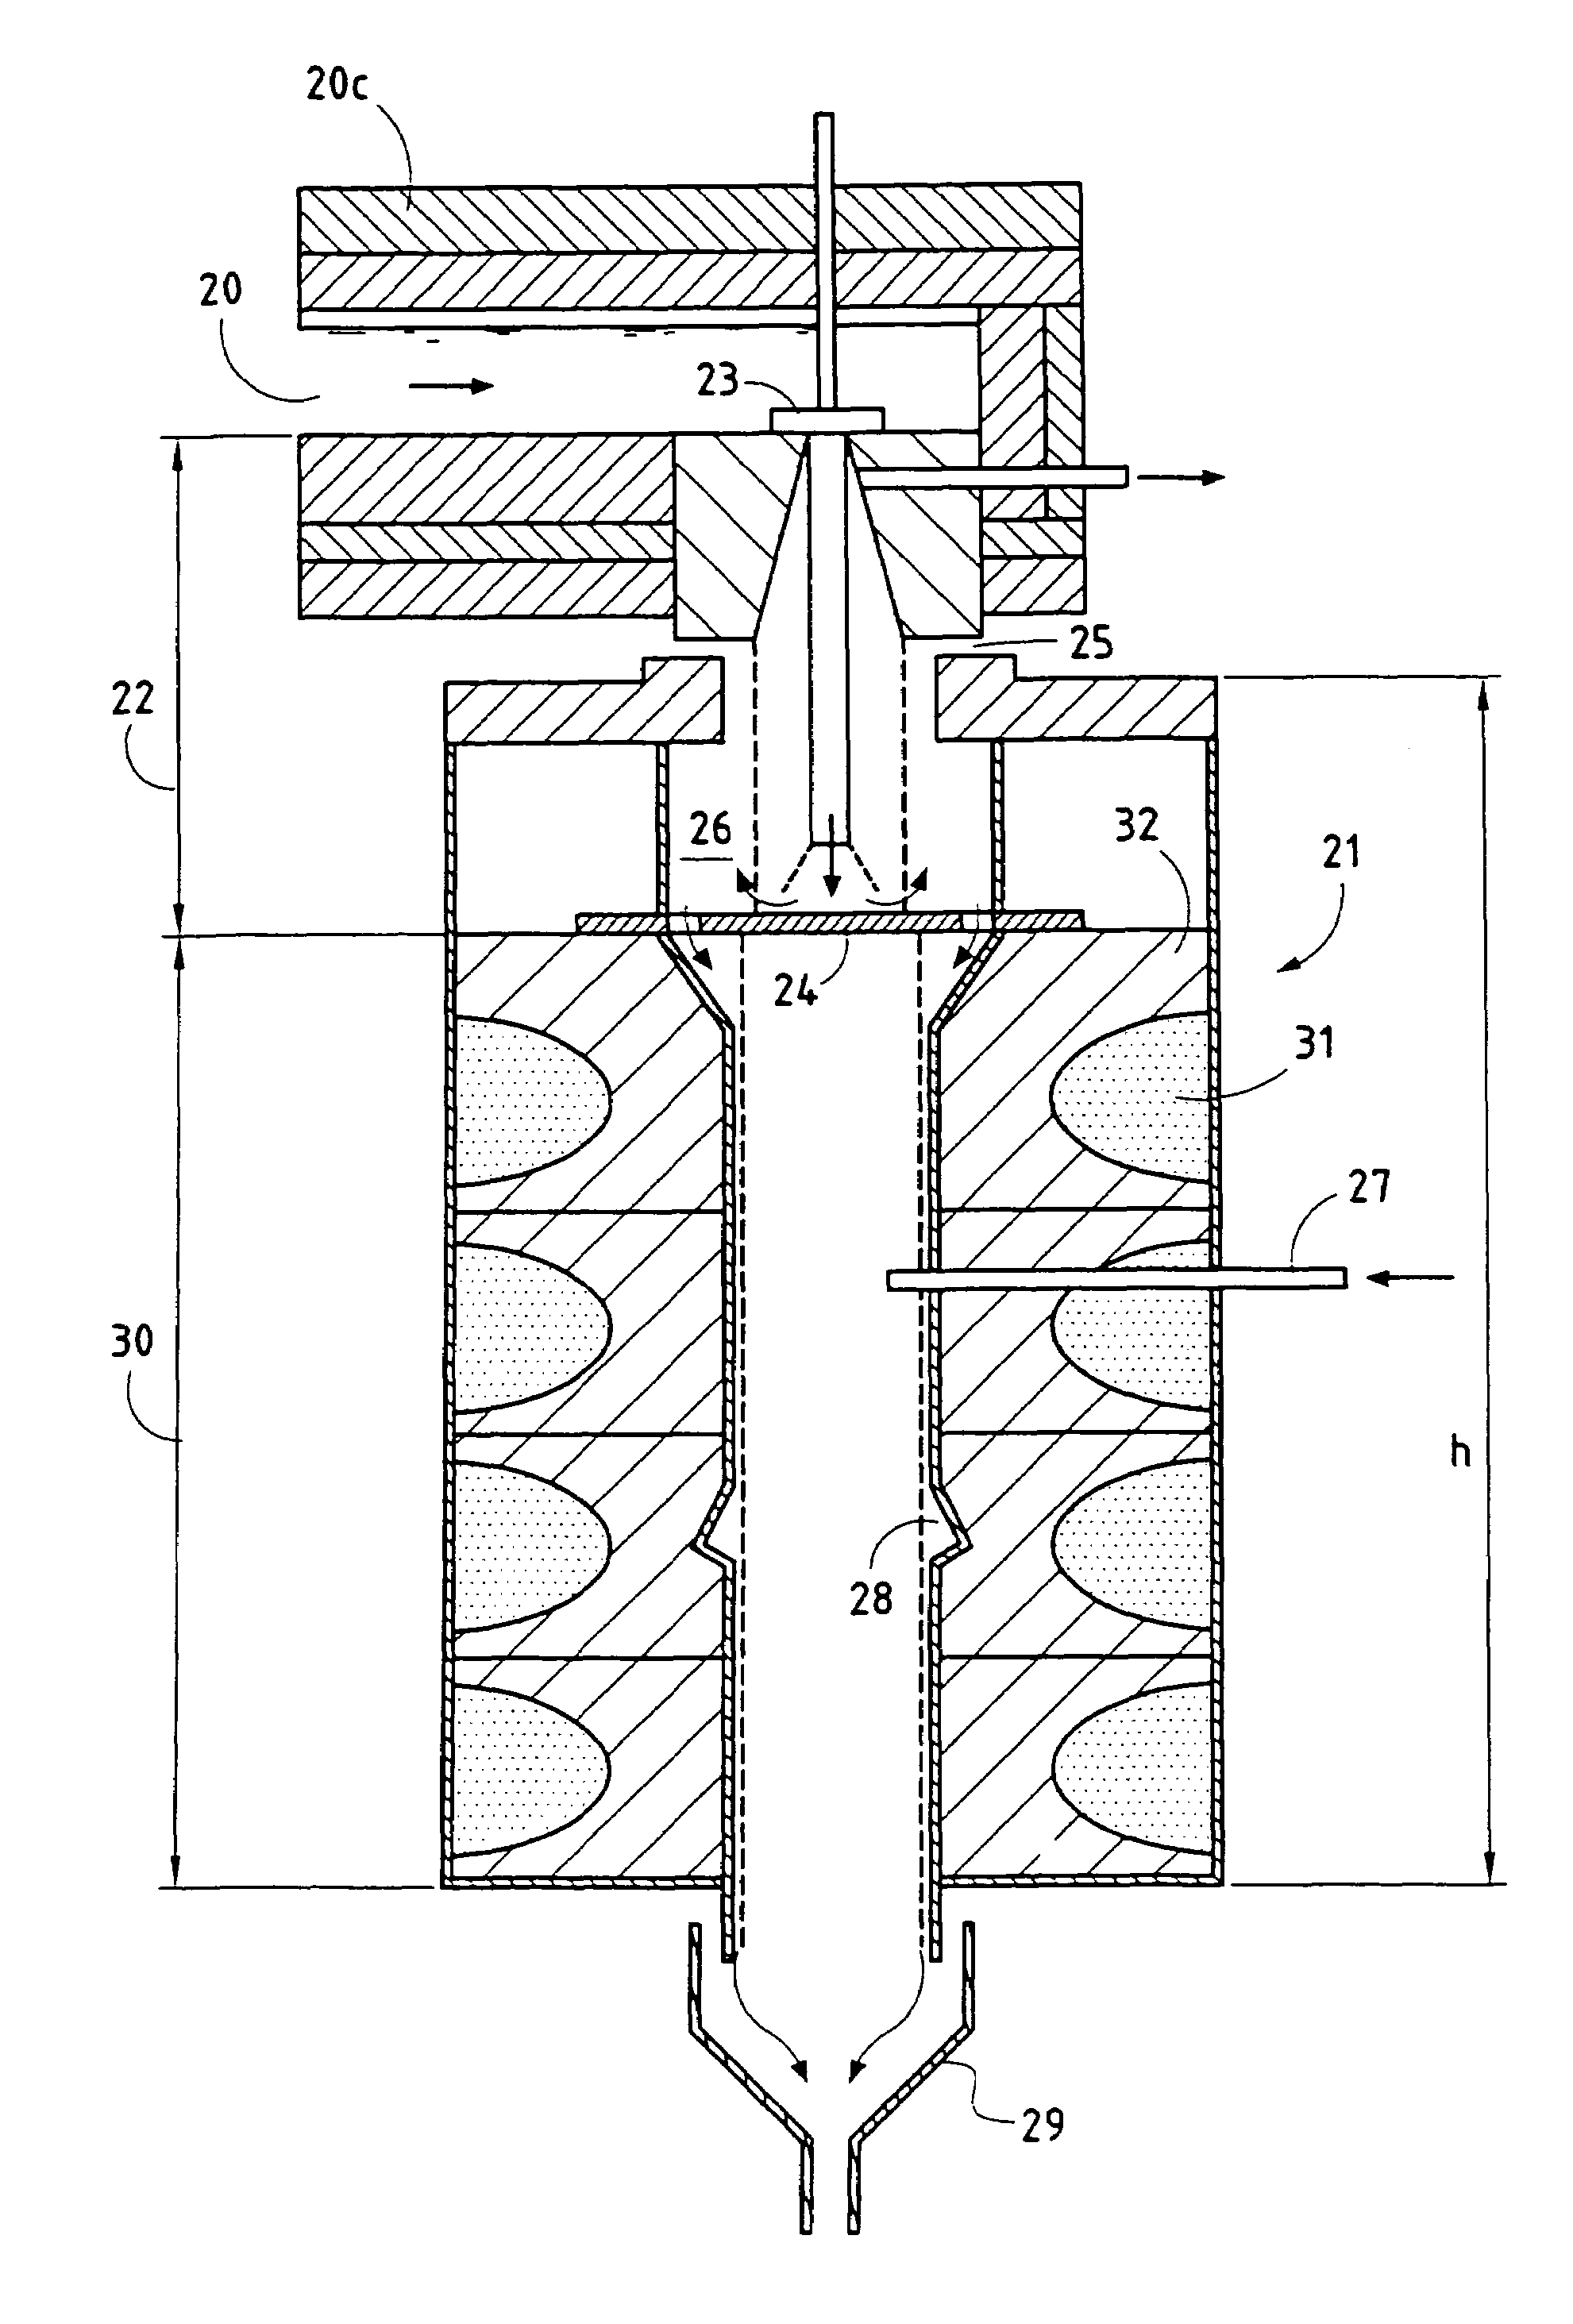 Method and device for melting and refining materials capable of being vitrified